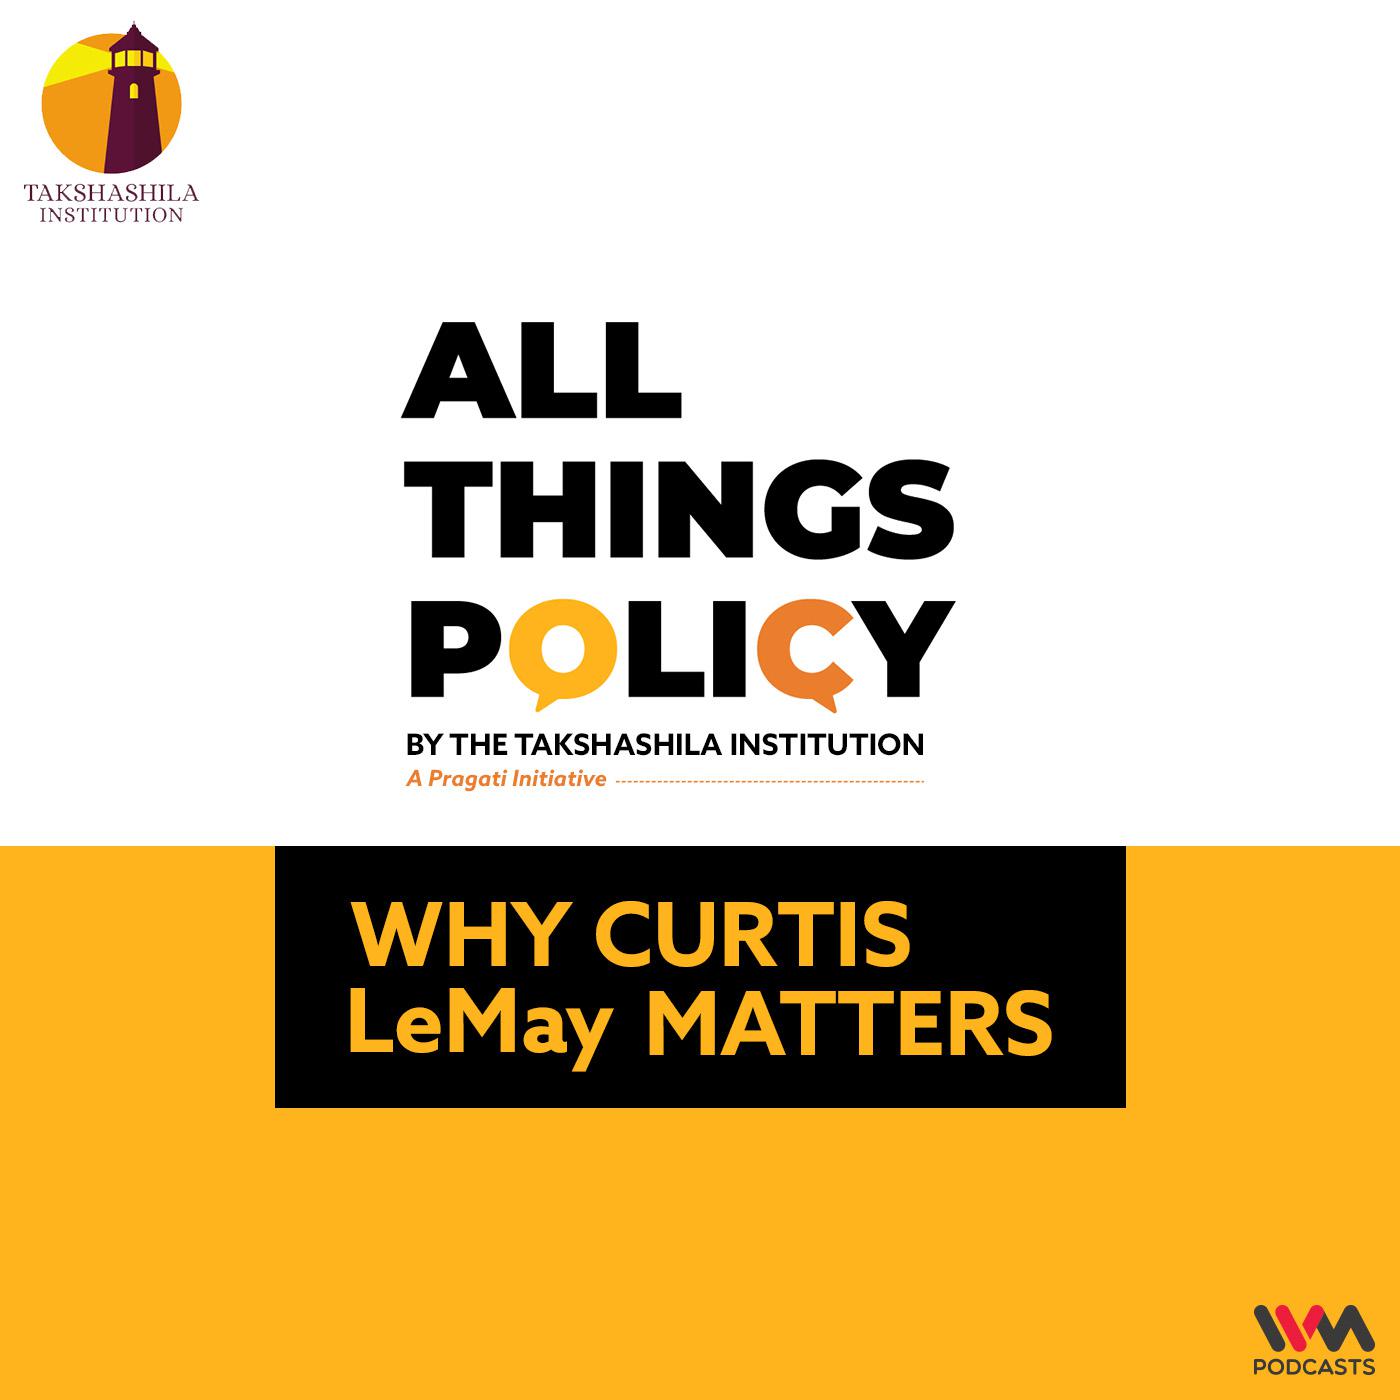 Why Curtis LeMay Matters